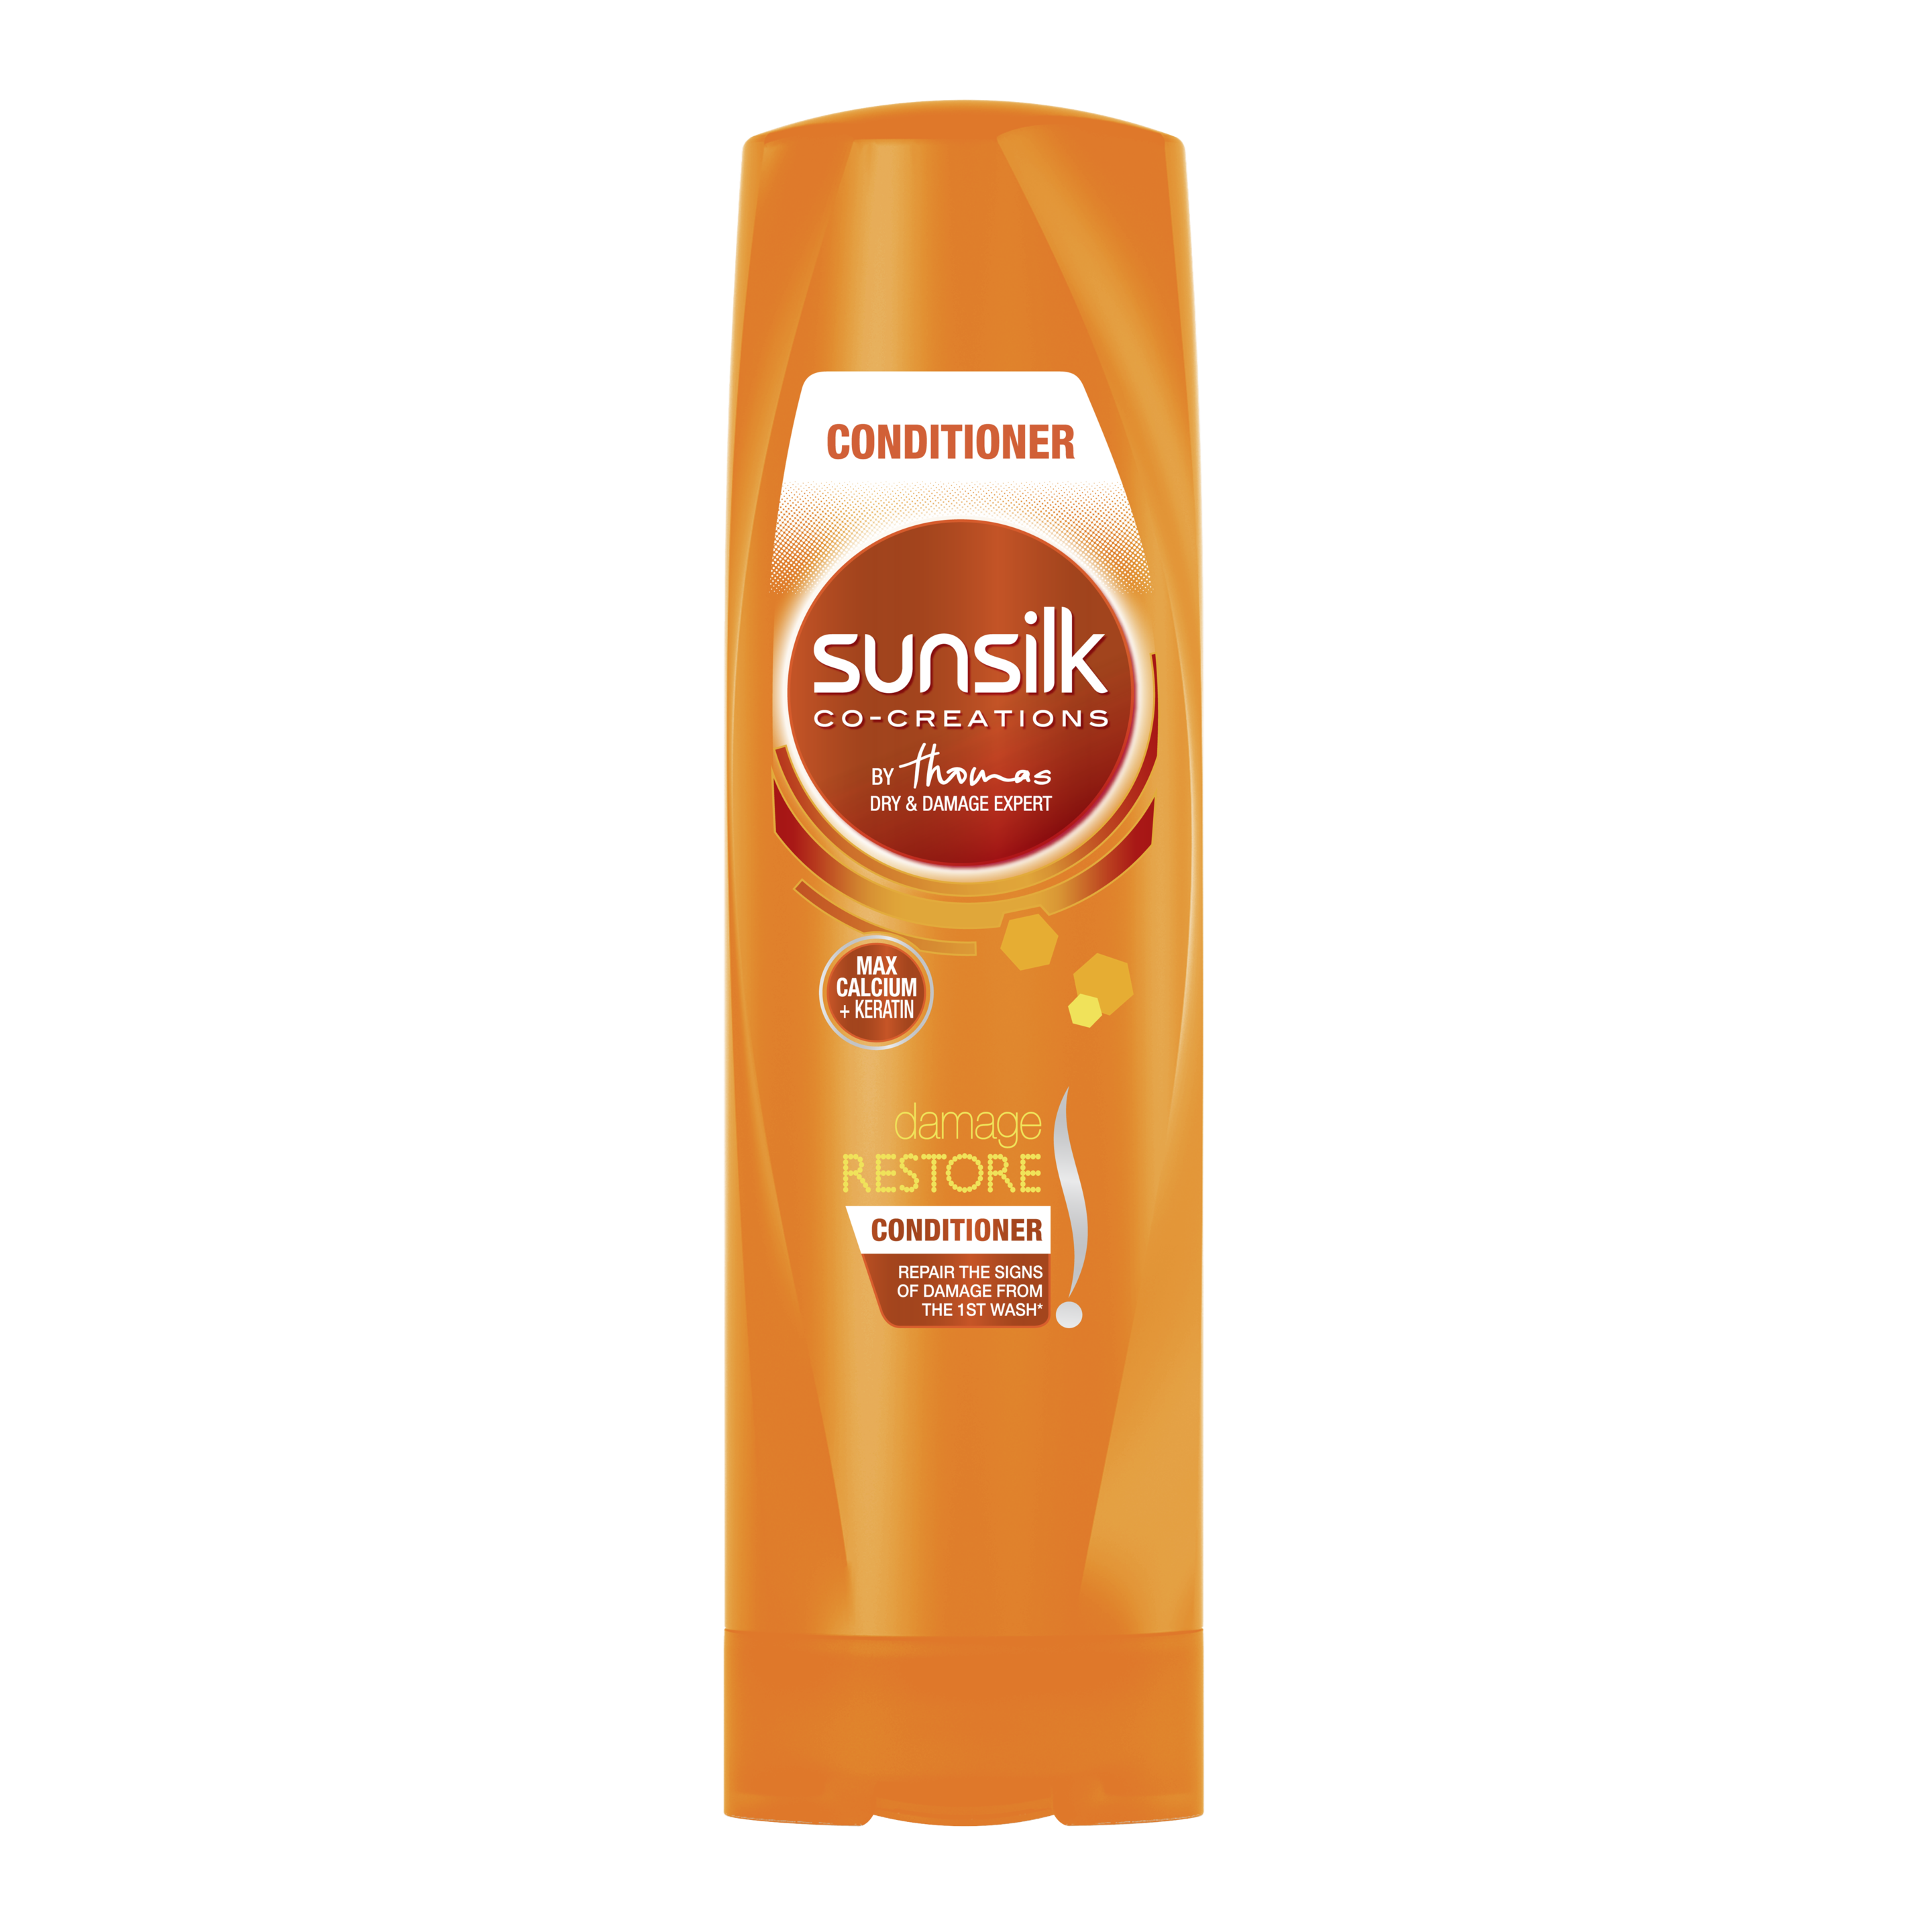 Sunsilk Damage Restore Conditioner 320ml front of pack image